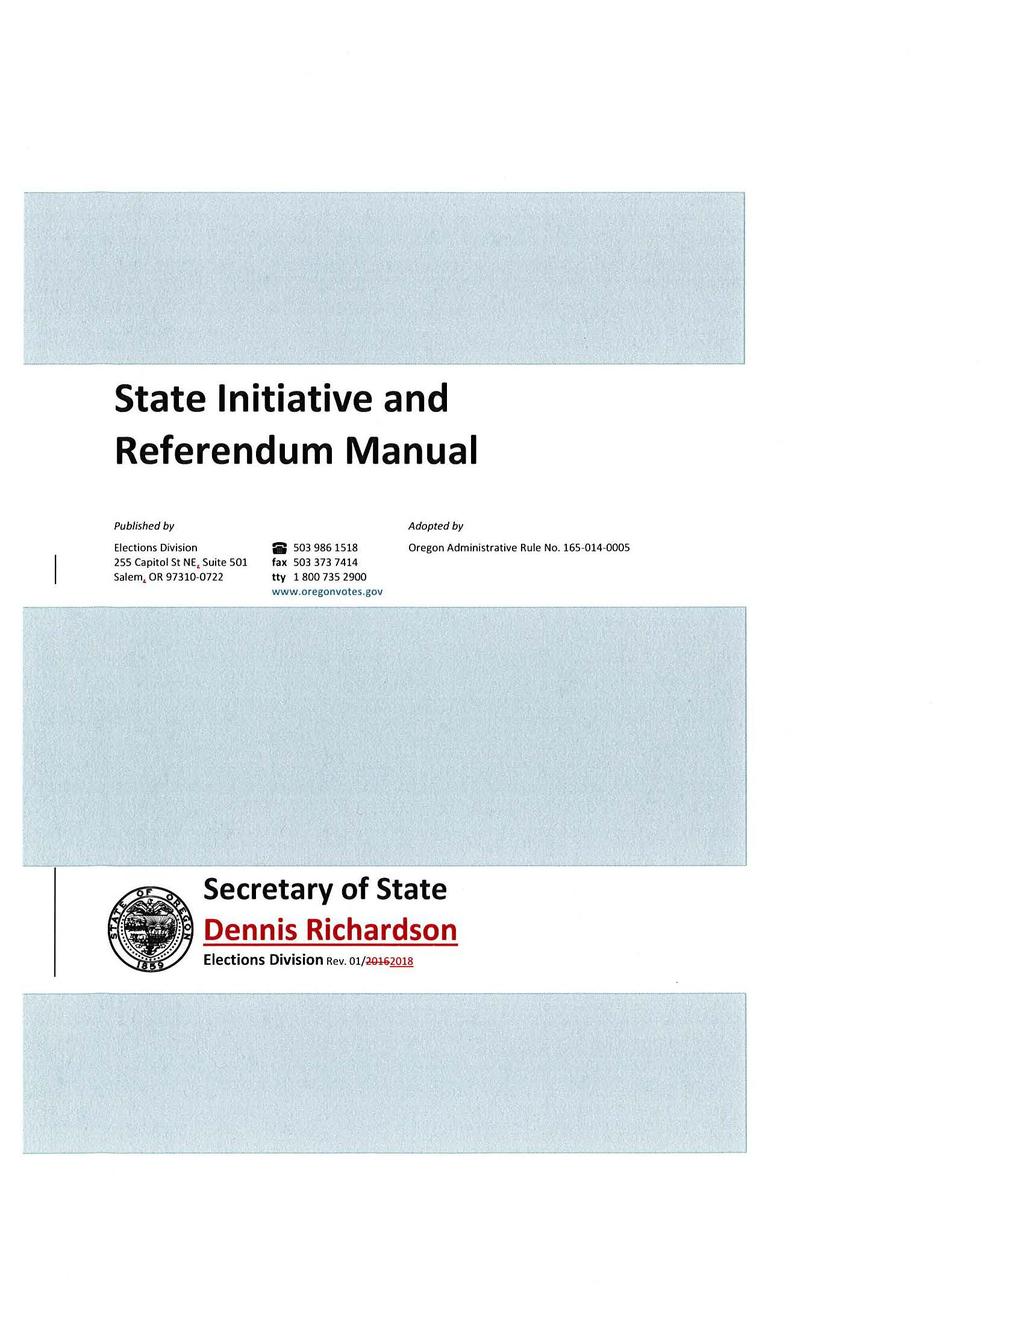 State Initiative and Referendum Manual Published by El ections Division ;ii 503 986 1518 255 Capitol St NE, Suite 501 fax 503 373 7414 Salem, OR 97310-0722 tty 1 800 735